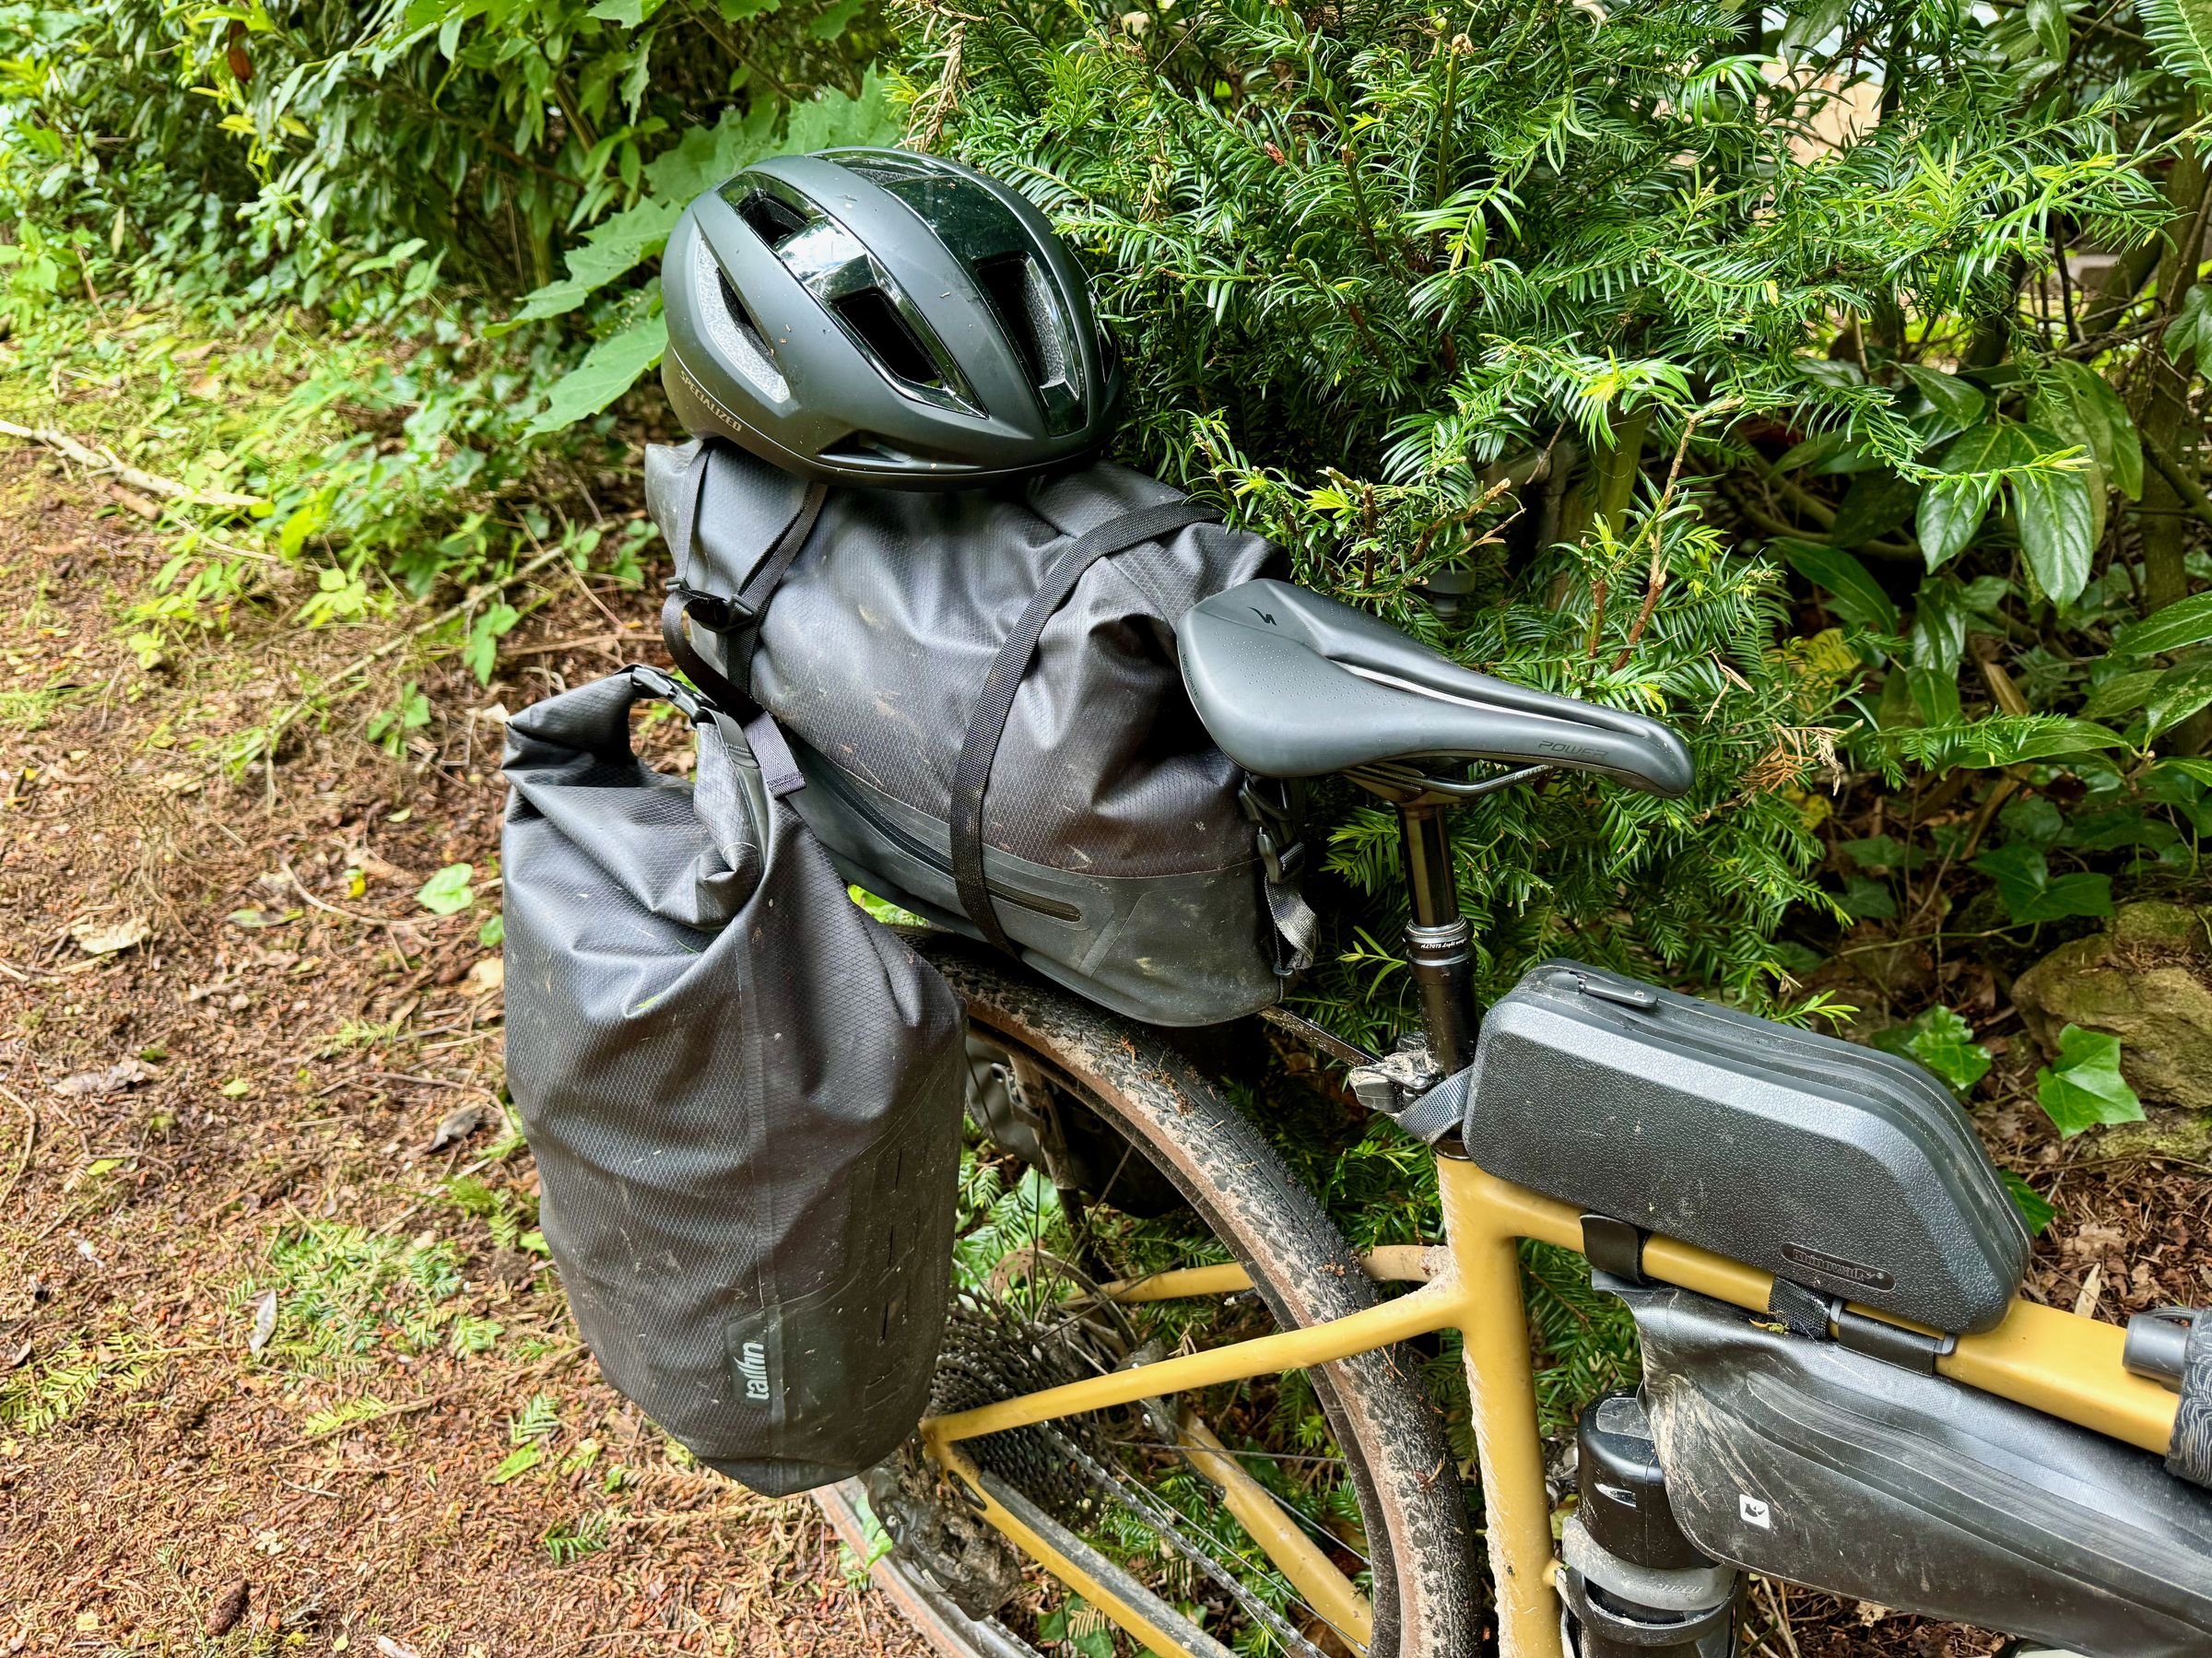 The top bag and two panniers create 50L of quick-release and waterproof storage.